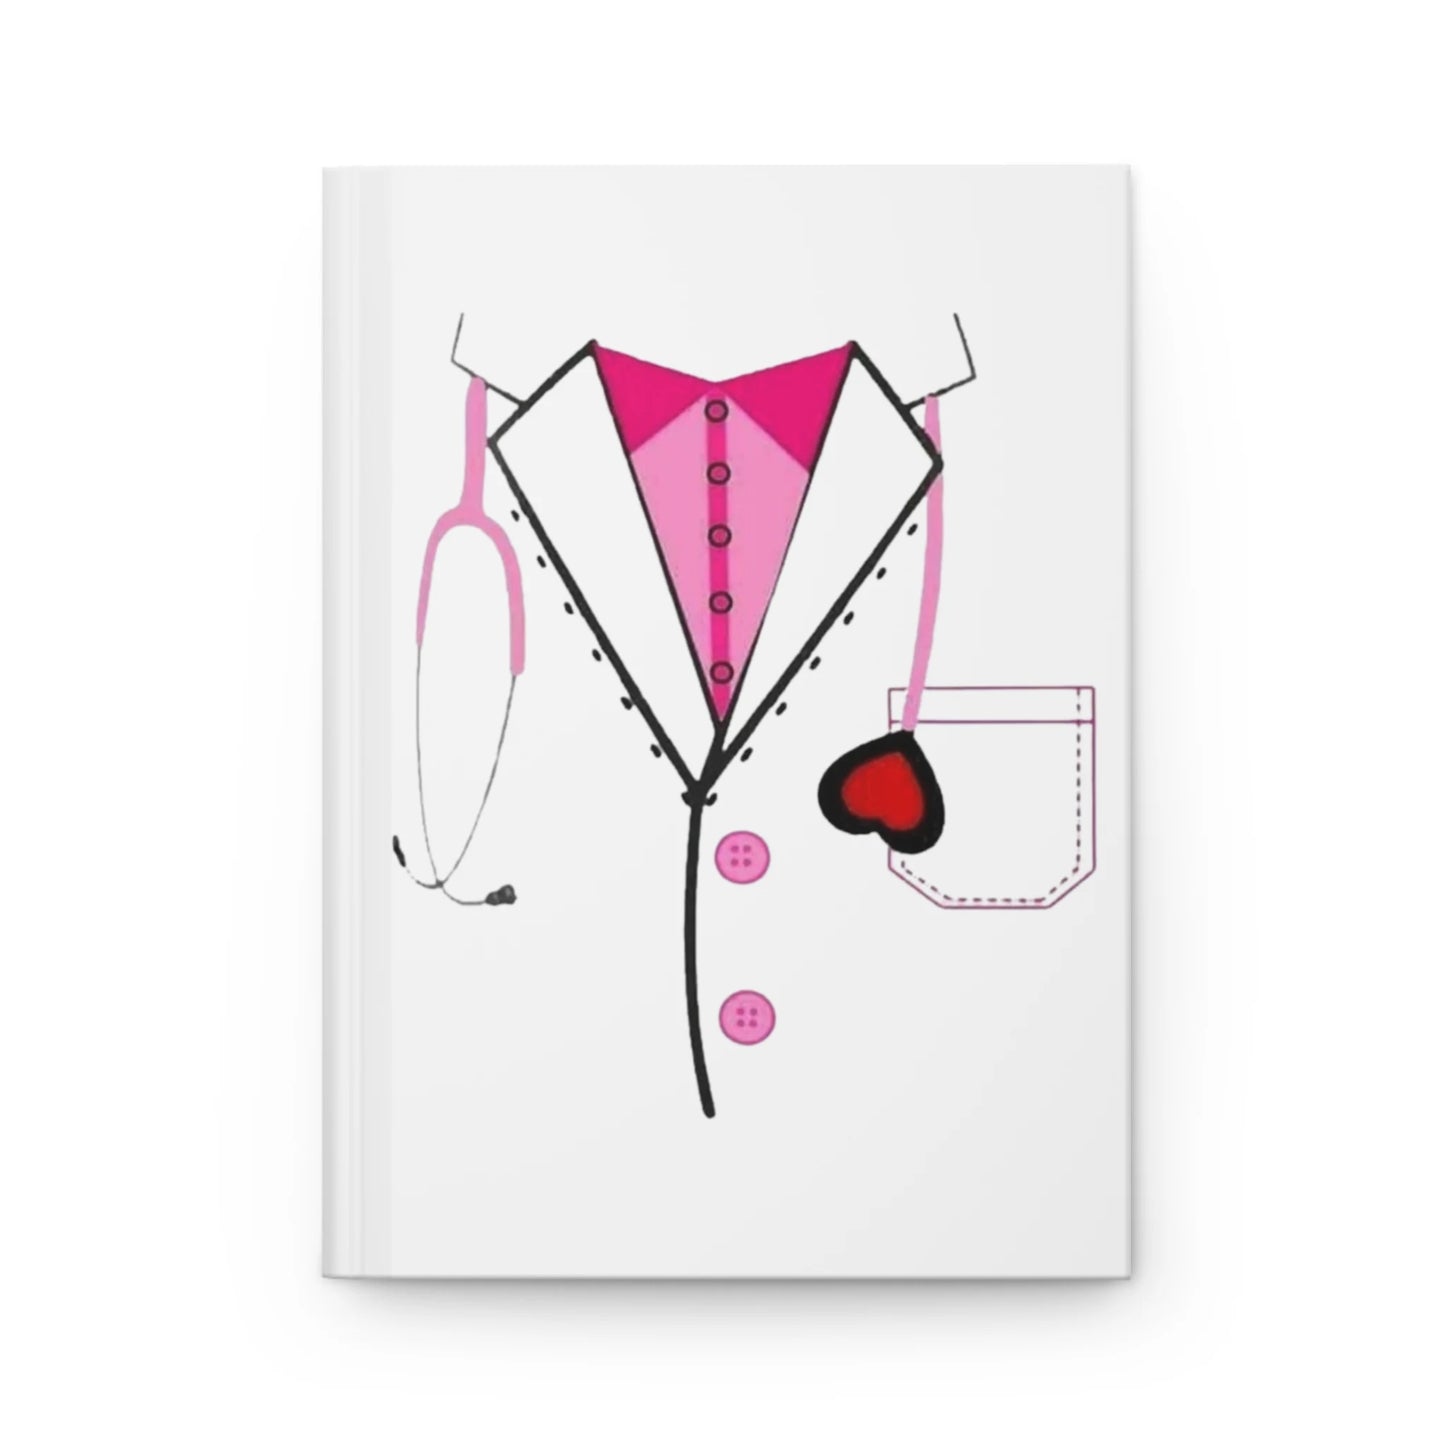 Hardcover Journal Matte (Doctor`s Day)